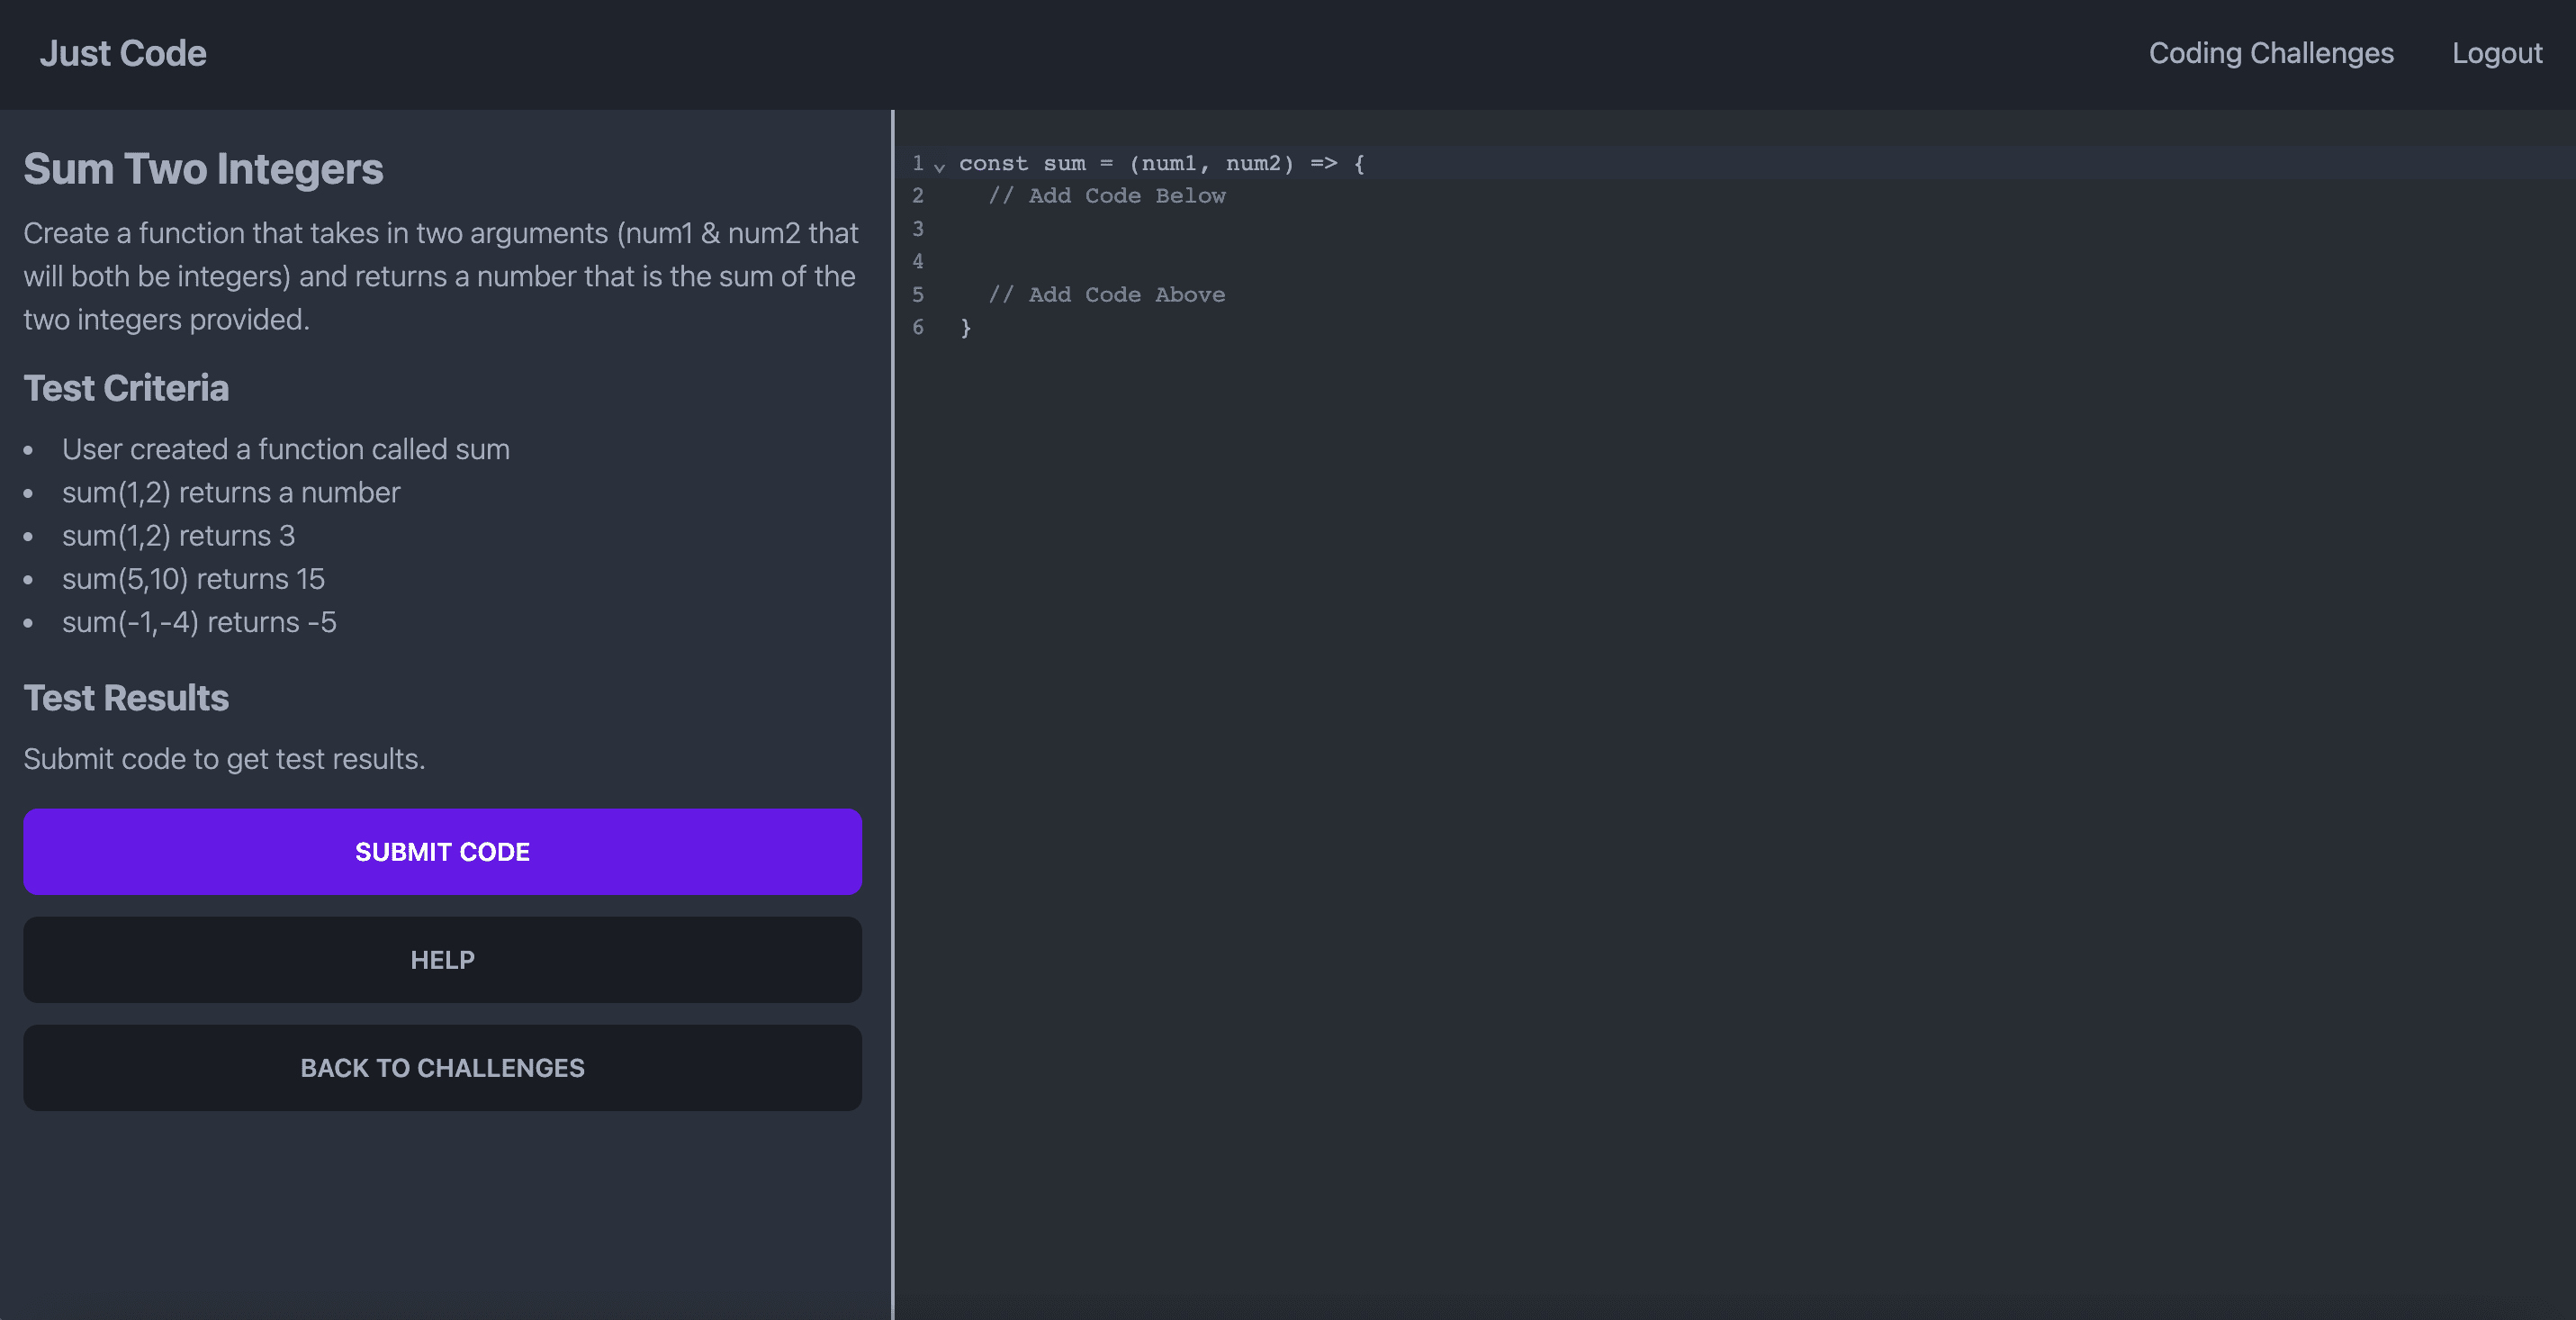 Picture of the landing page for just code